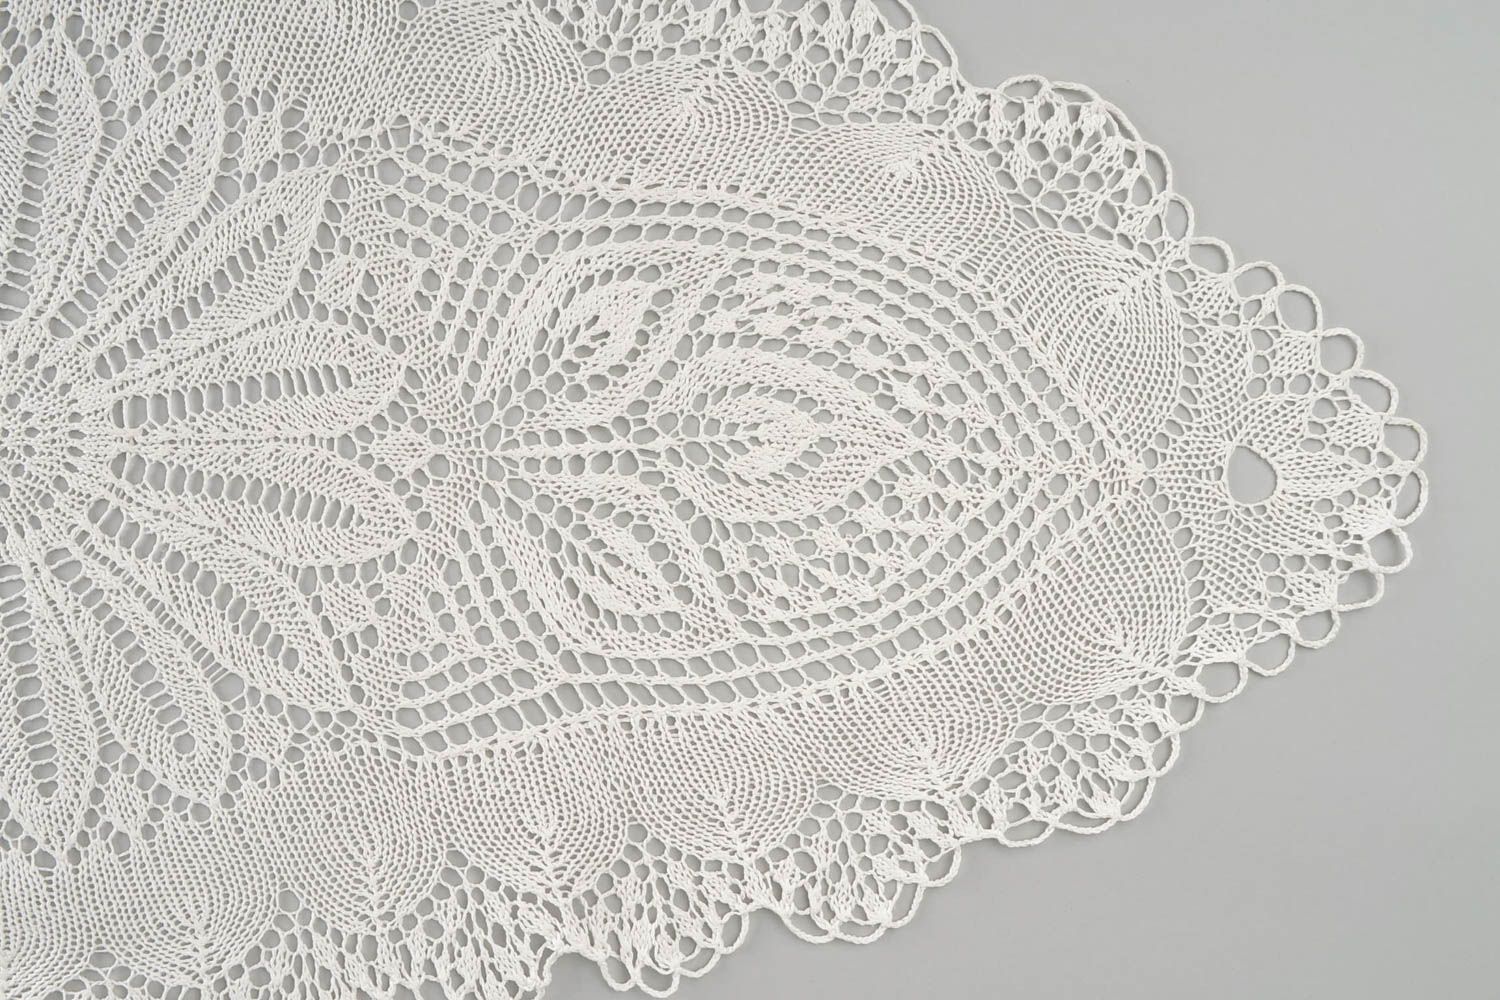 Handmade knitted tablecloth openwork lace napkin vintage style interior decor photo 4